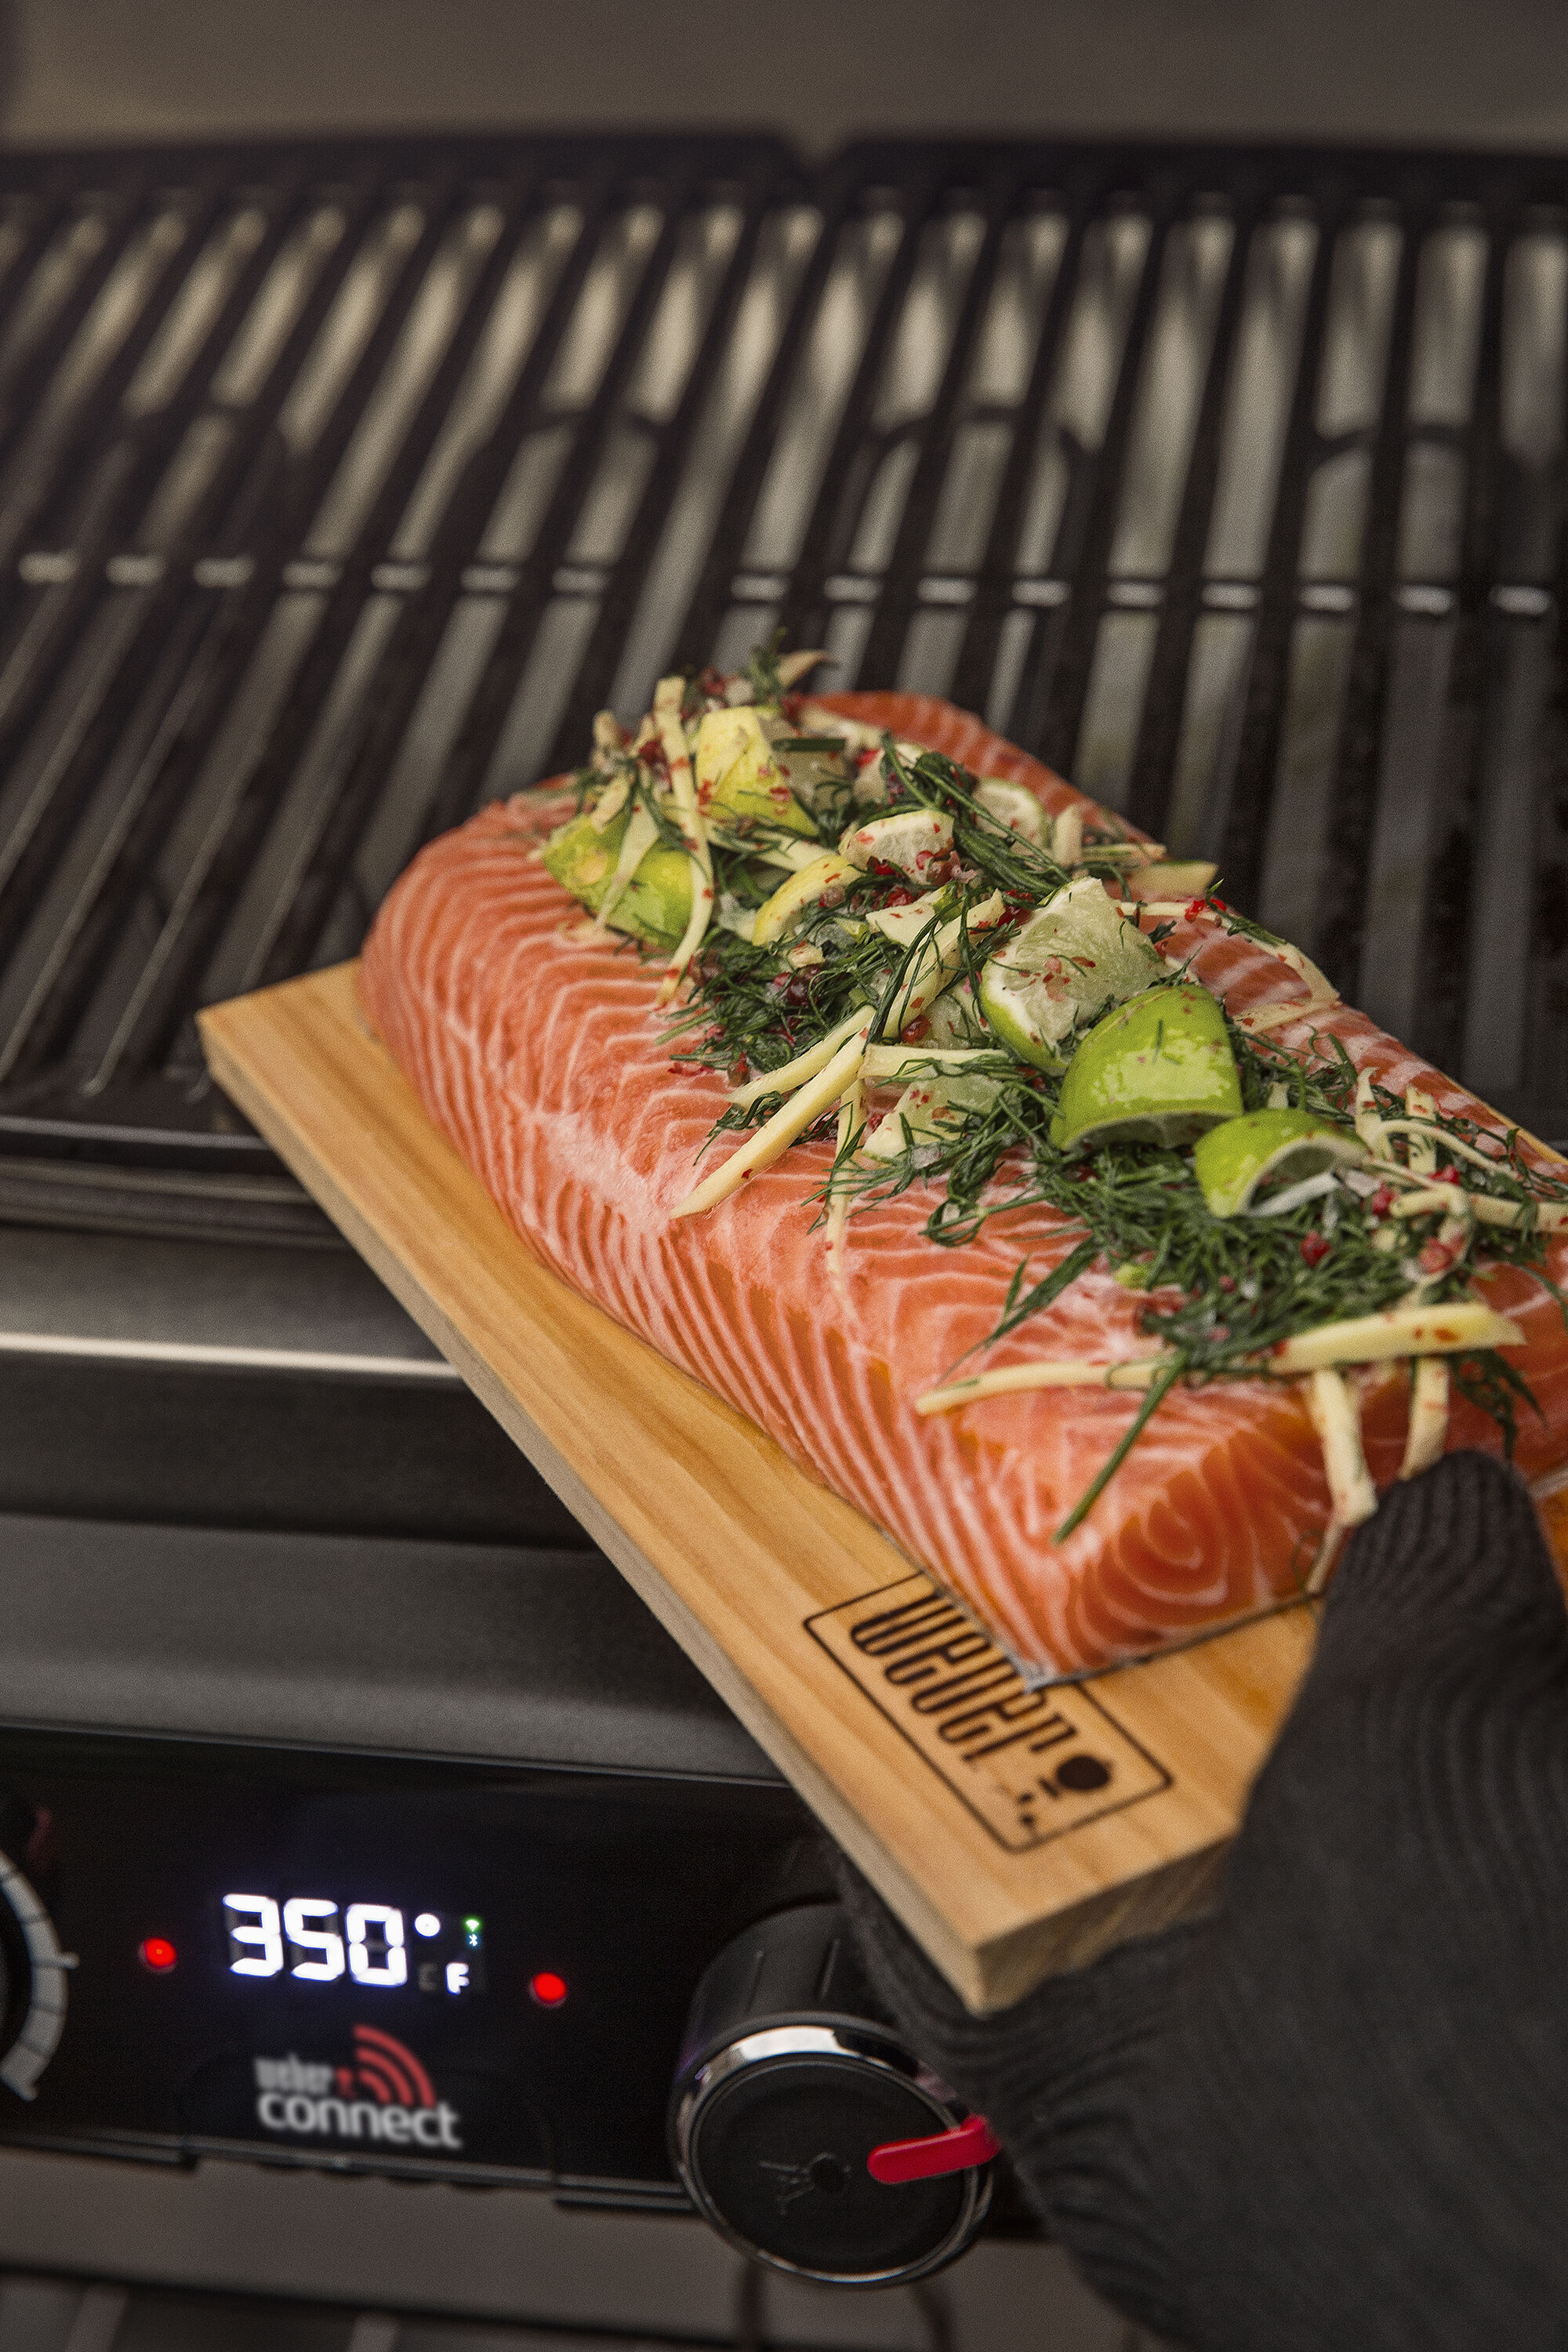 Shop Weber Electric Grill at Lowes.com